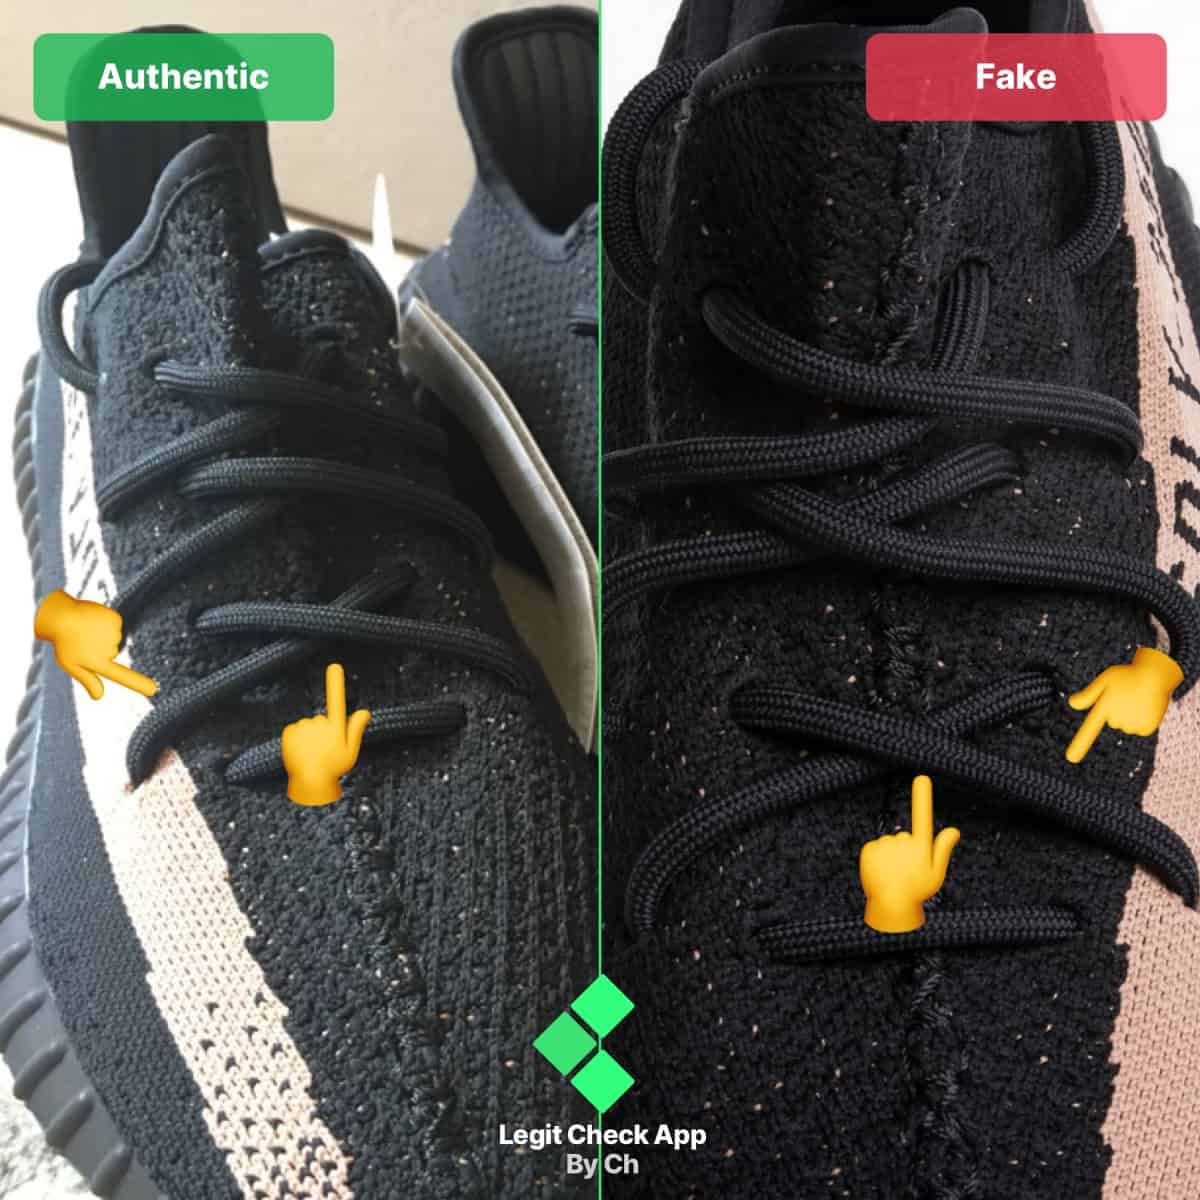 fake vs real yeezy copper